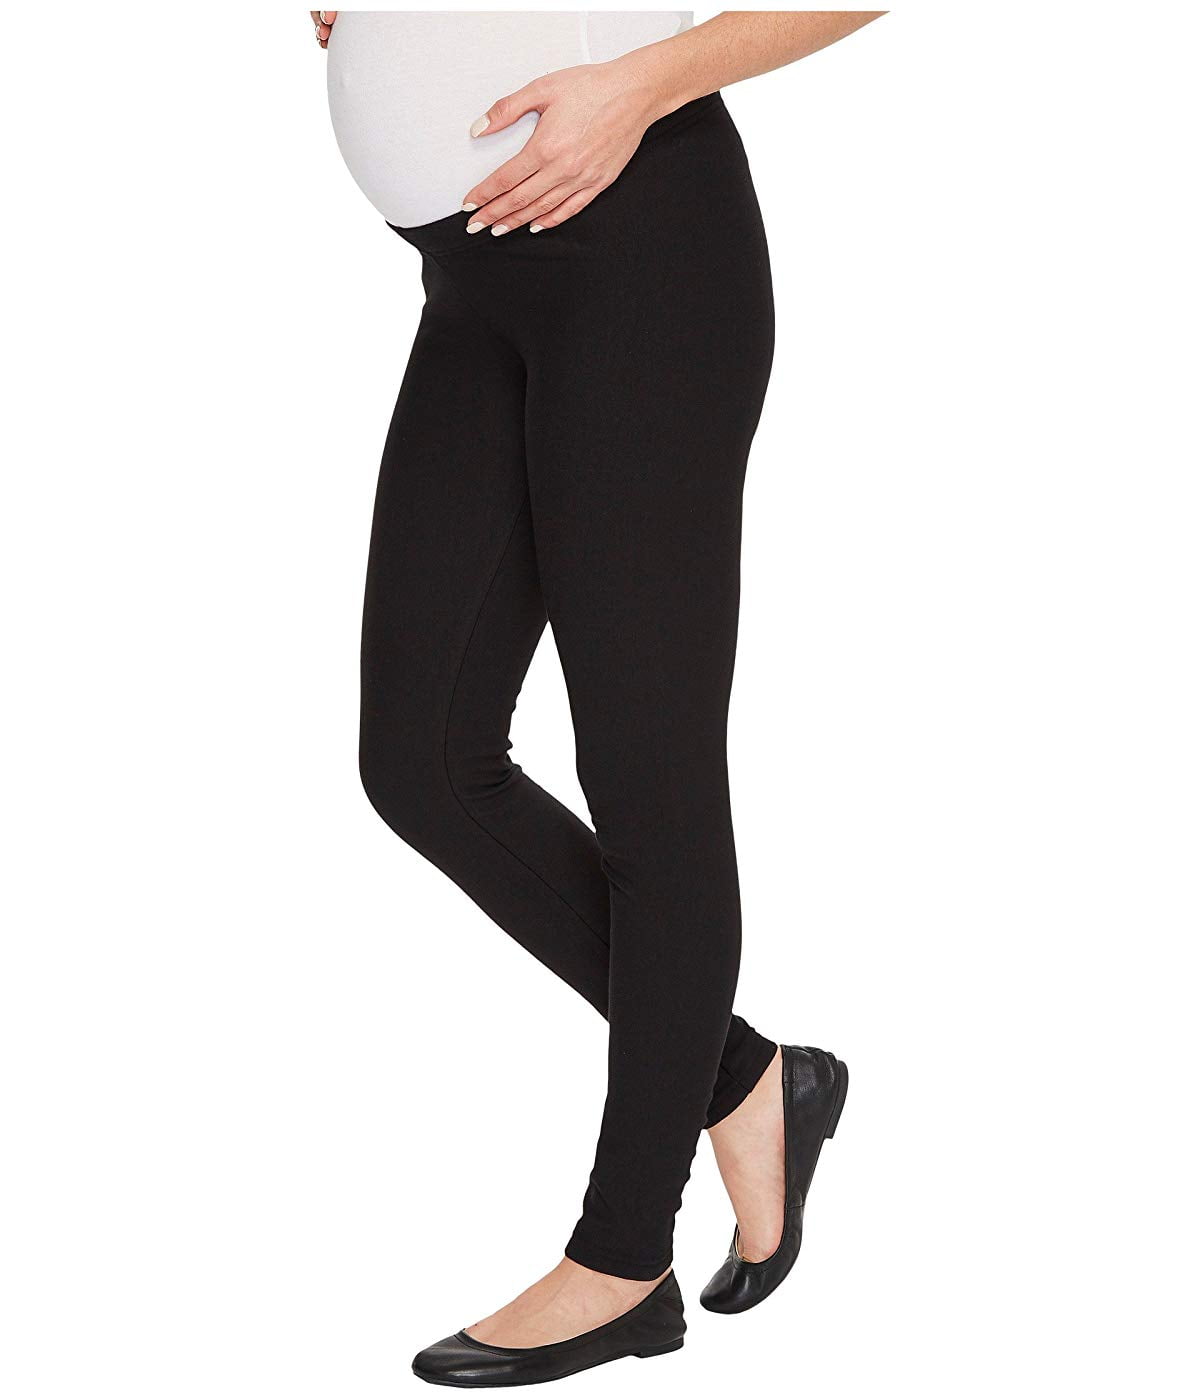 Taqqpue Women's Maternity Fleece Lined Leggings Over the Belly Pregnancy  Winter Warm Thick Pregnancy Yoga Workout Pants High Waist Stretchy Thermal  Maternity Leggings for Women 